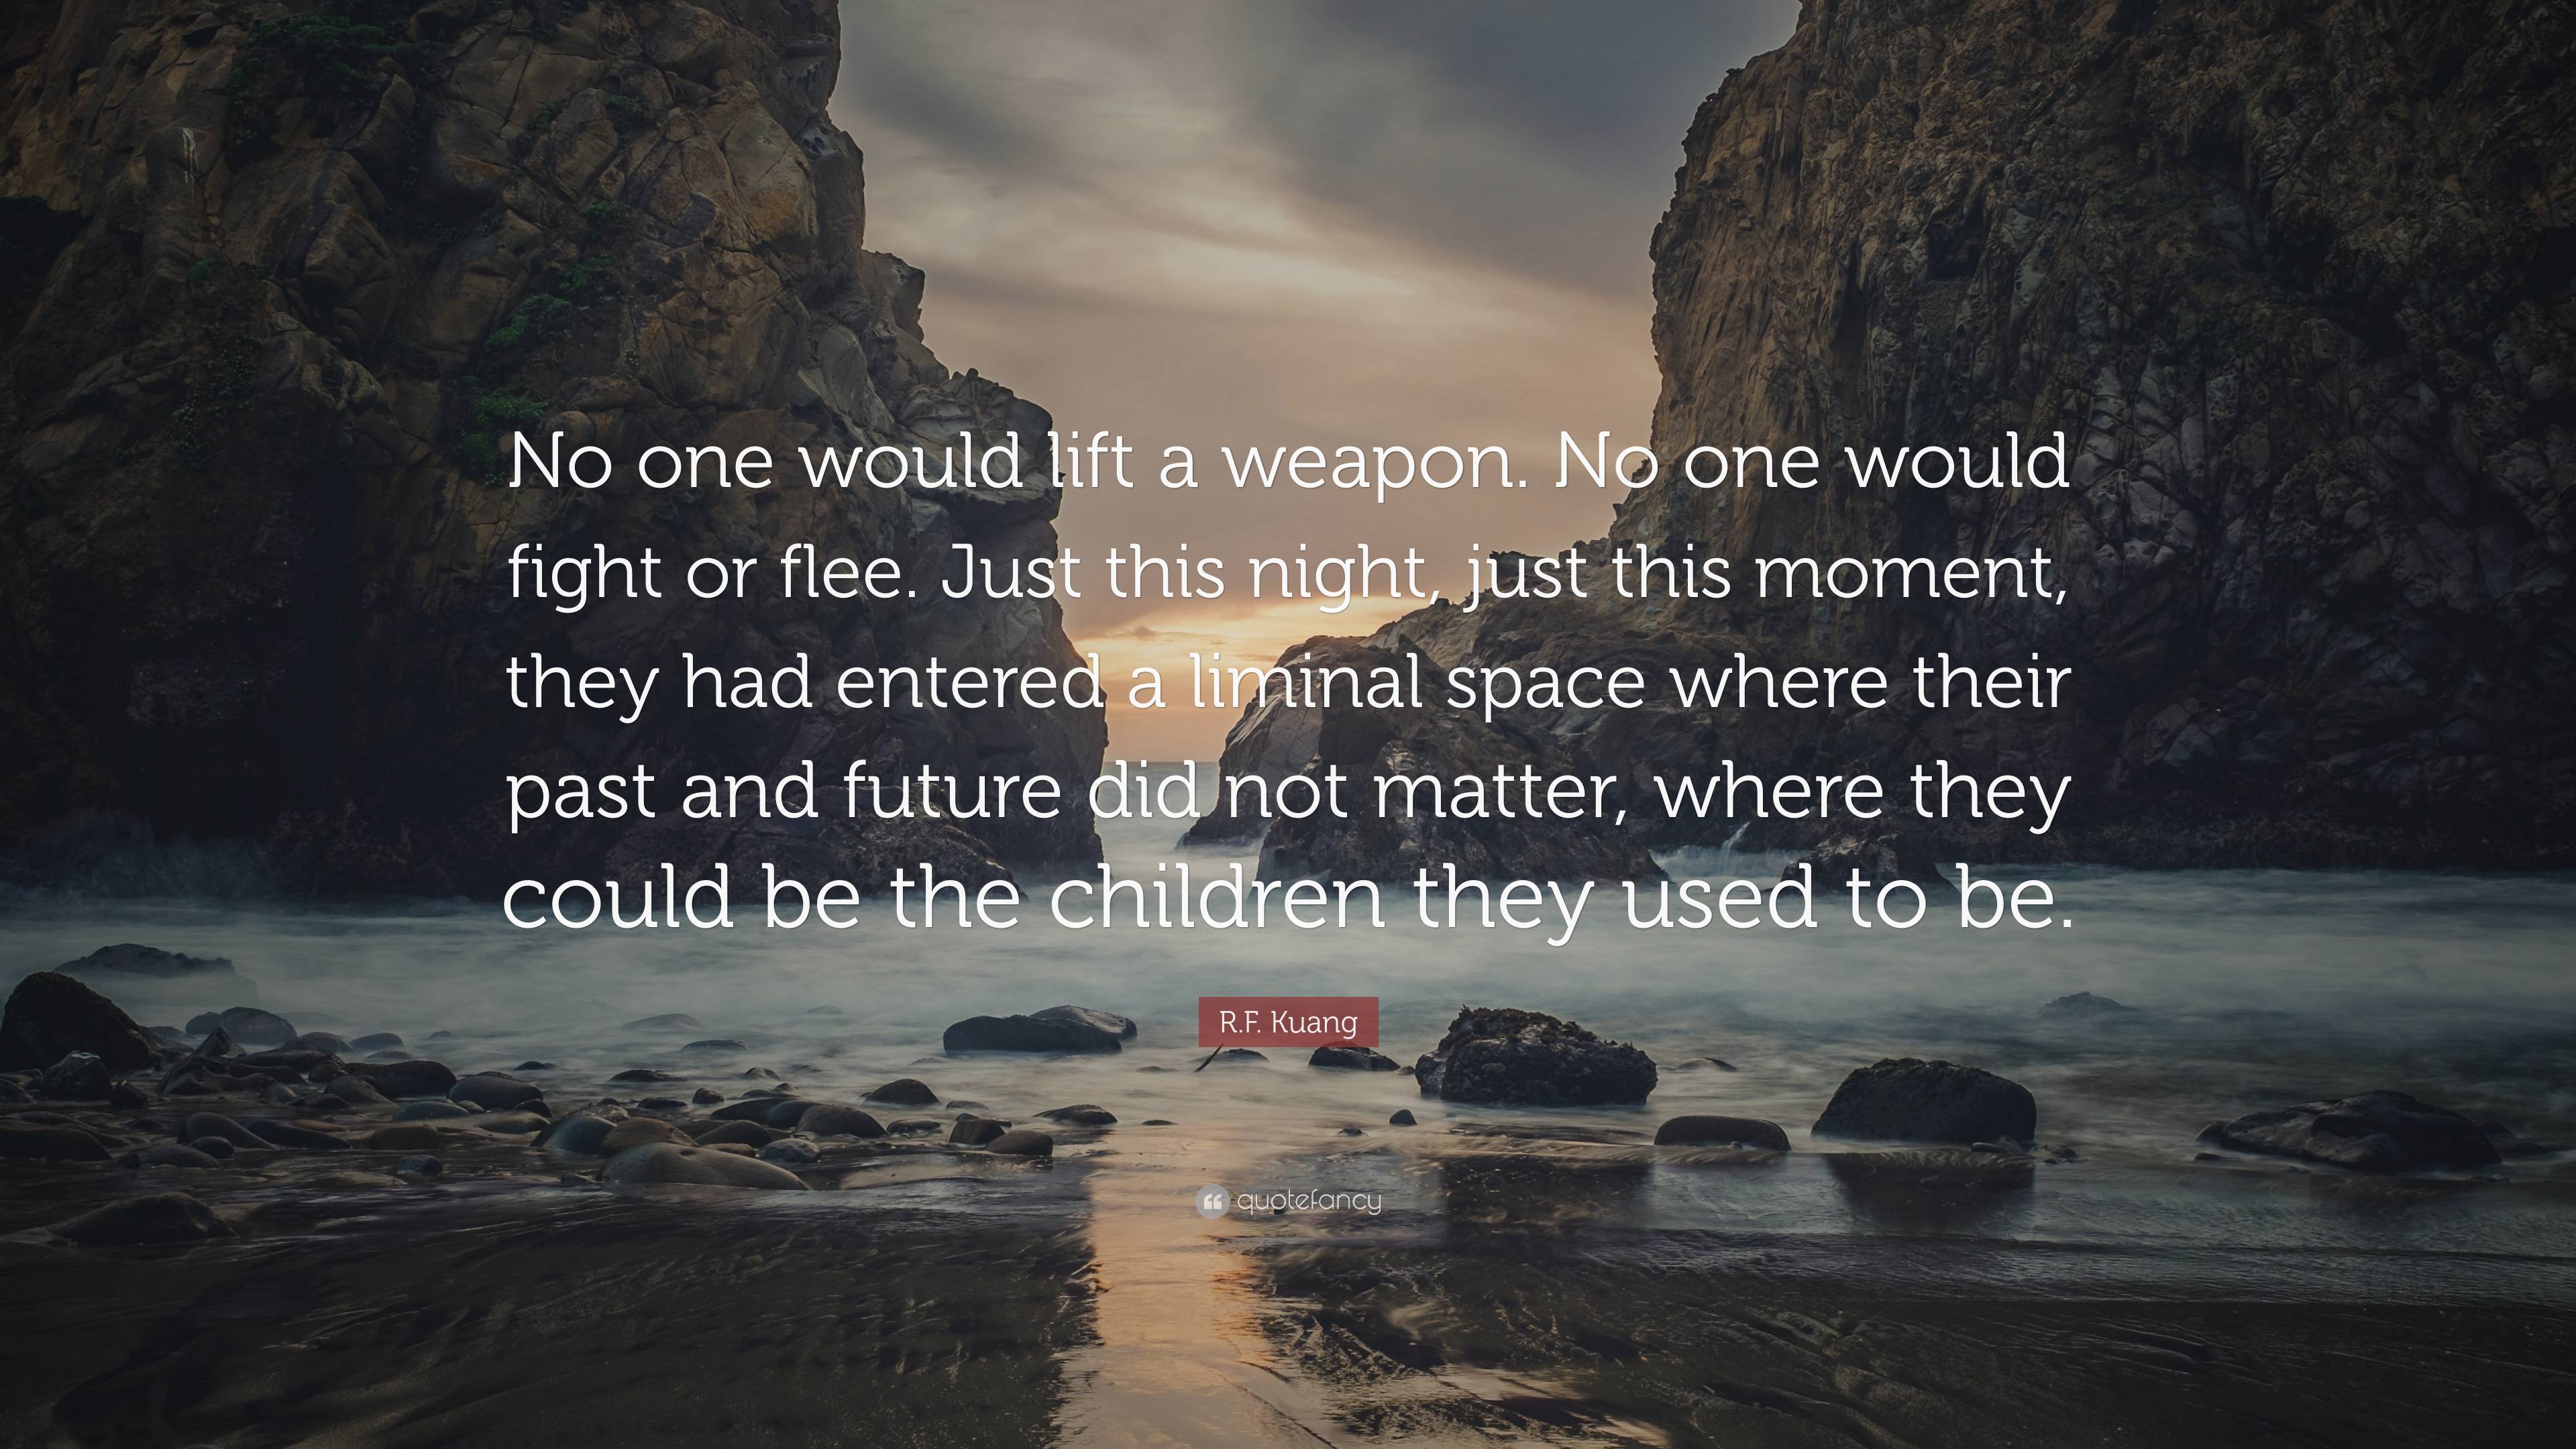 R.F. Kuang Quote: “No one would lift a weapon. No one would fight